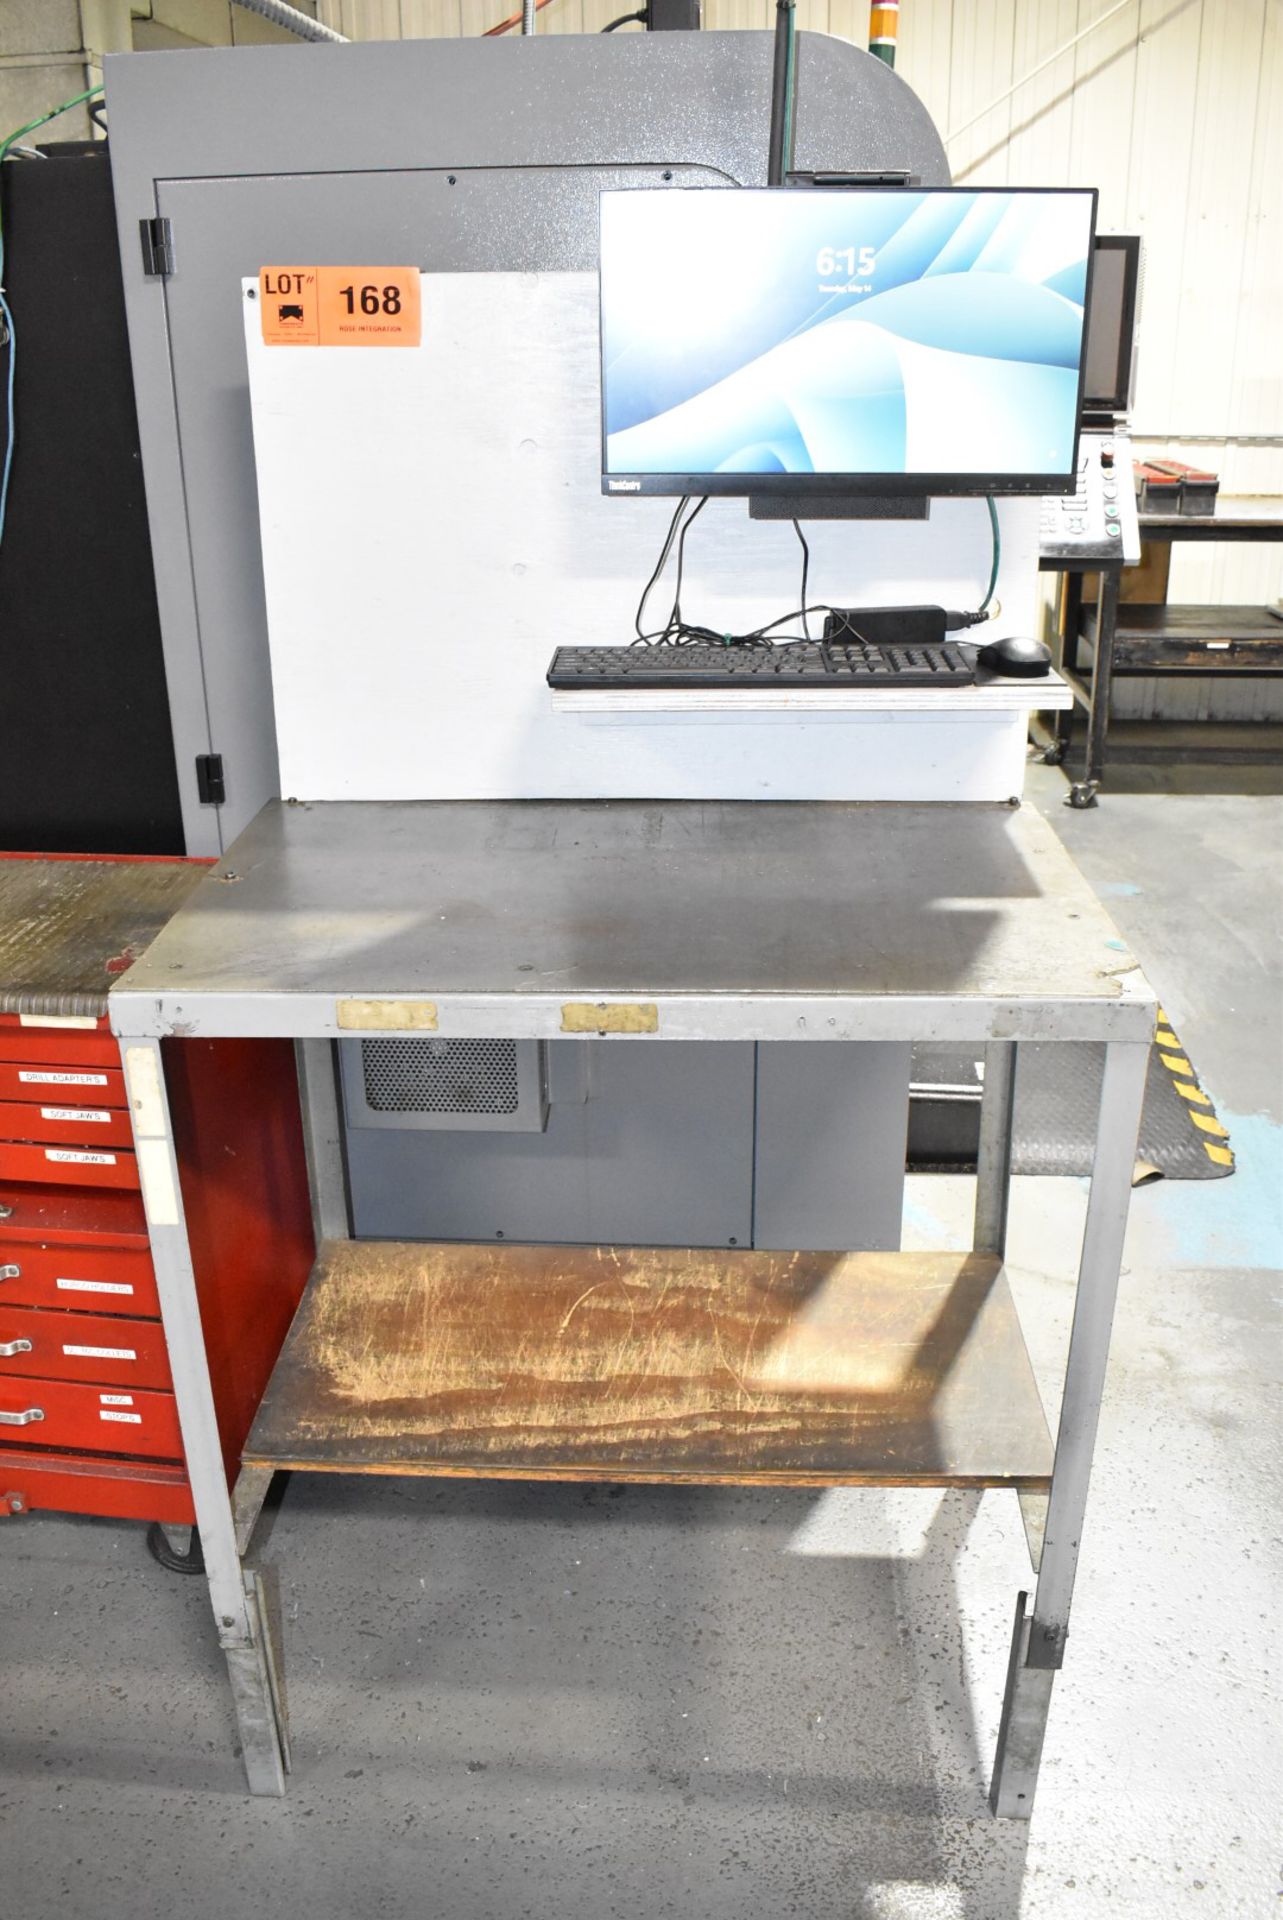 LOT/ SHOP TABLE WITH LENOVO THINKCENTRE COMPUTER